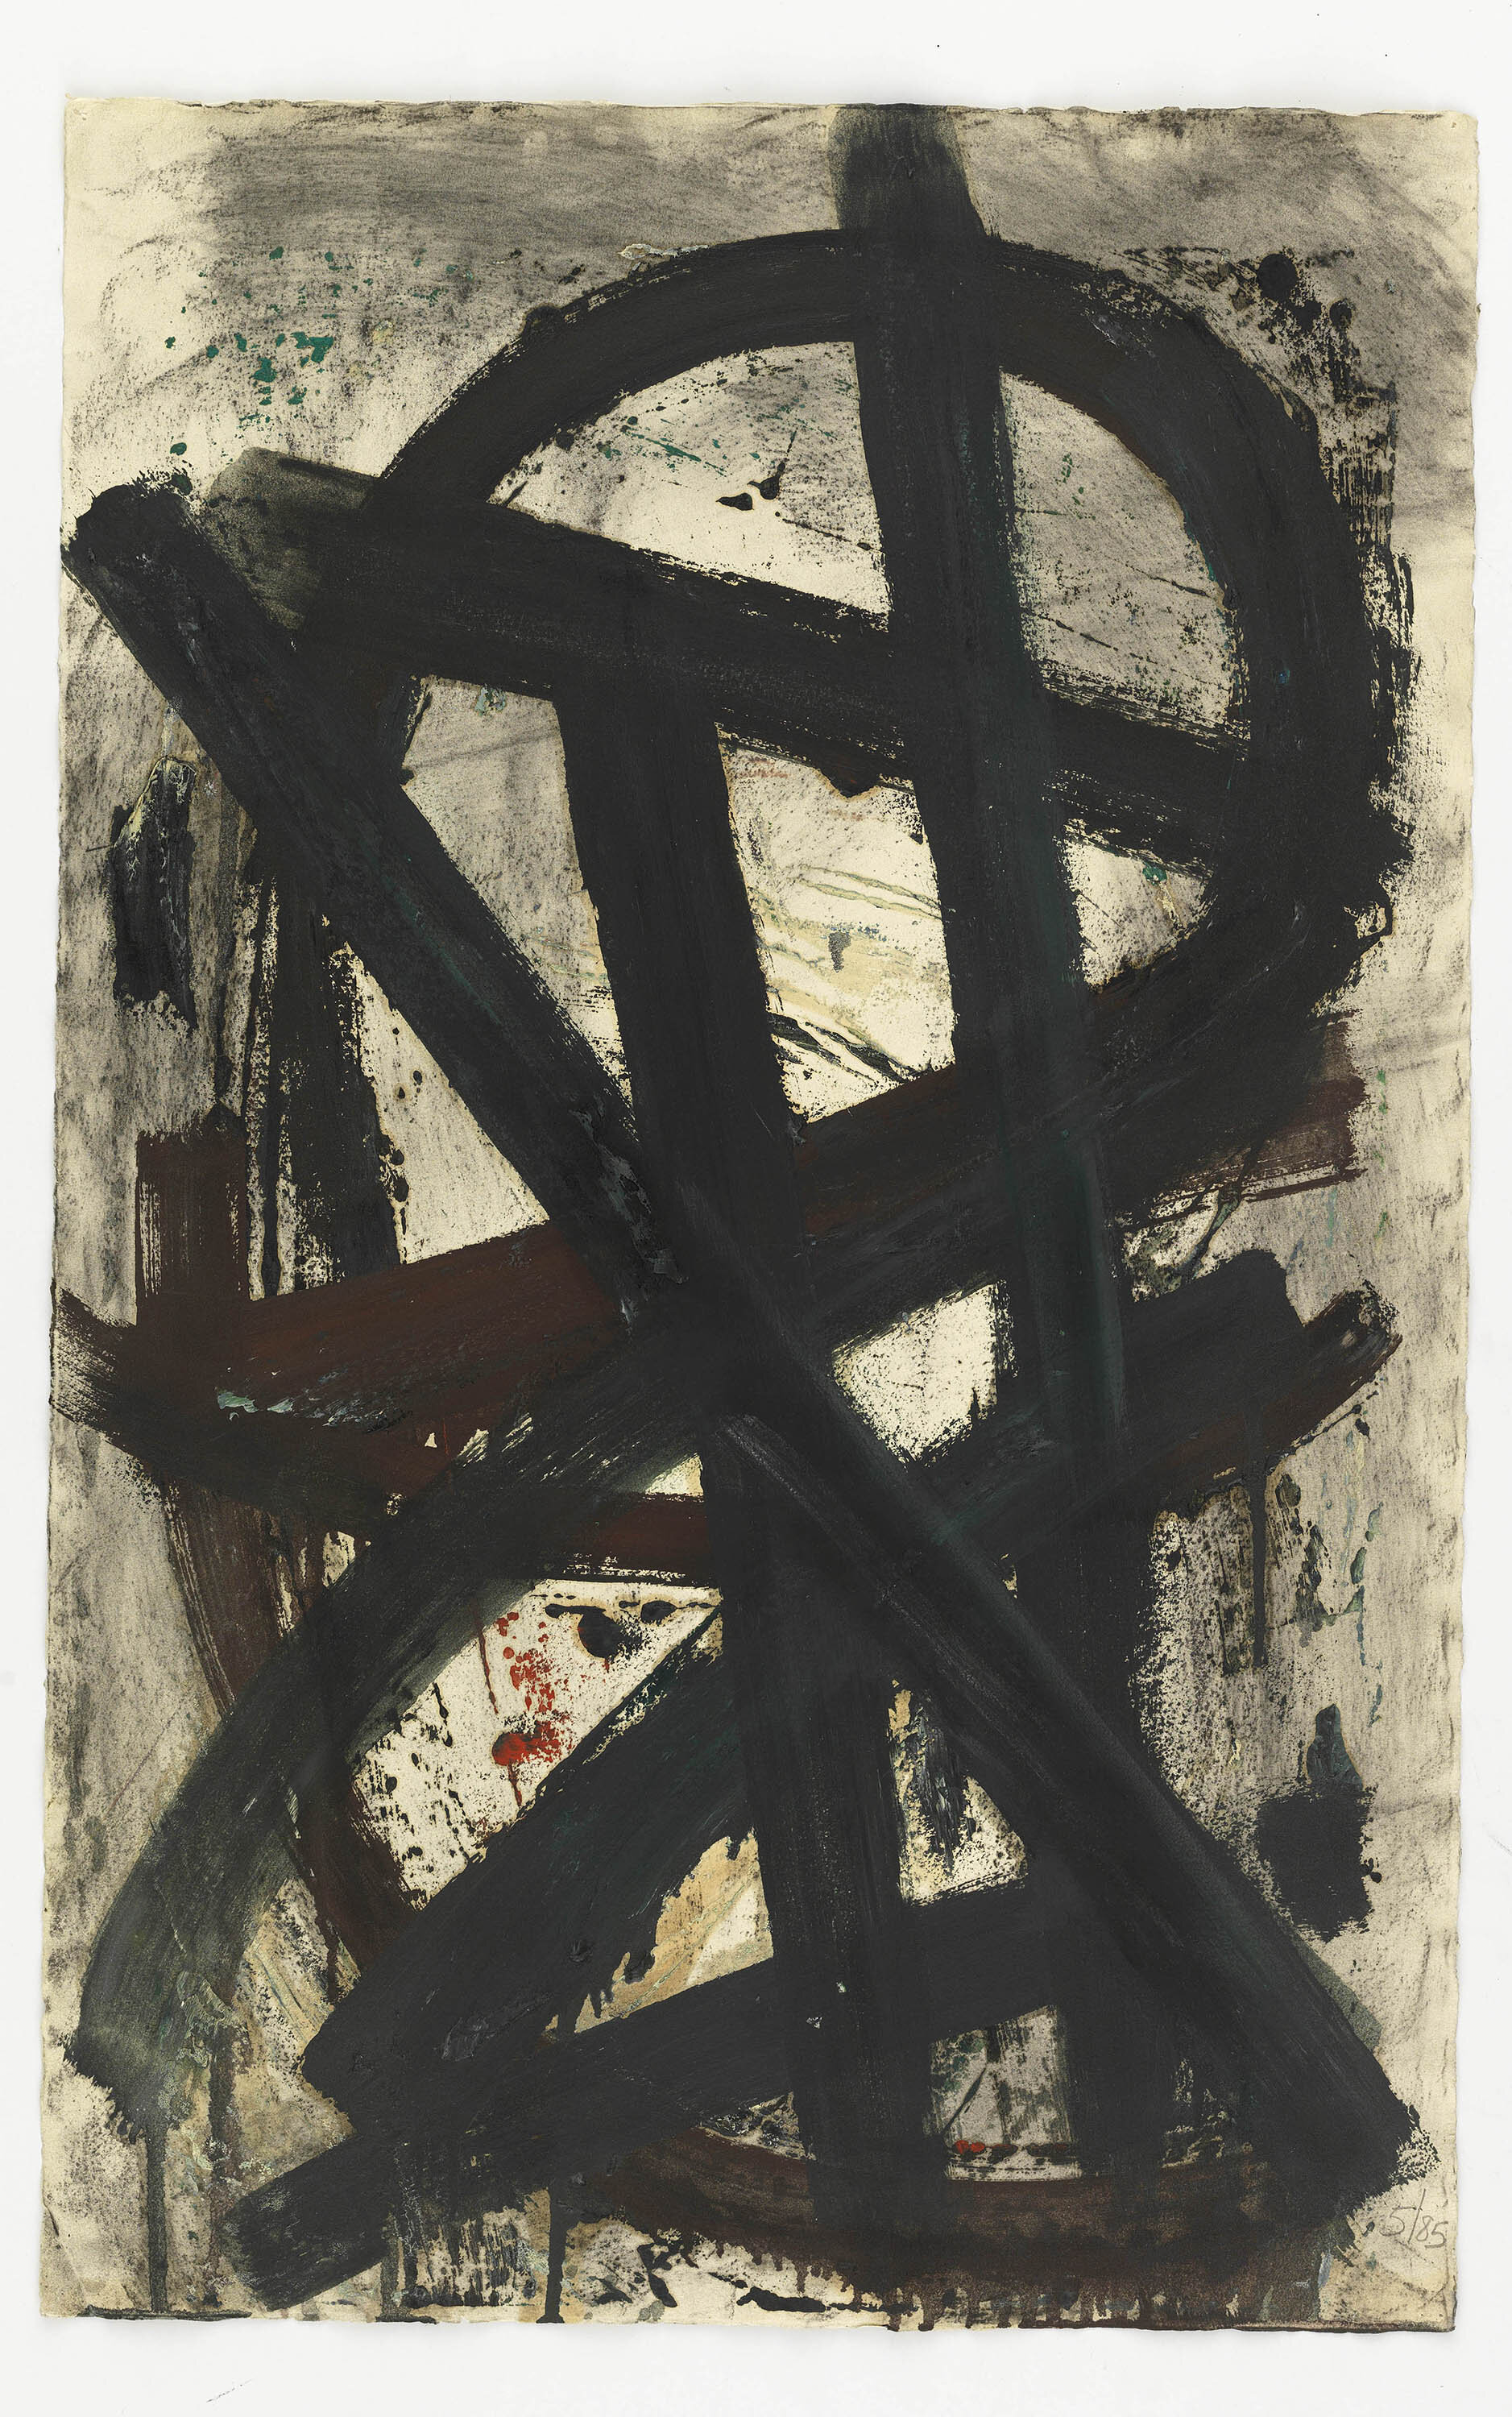  Louise Fishman,&nbsp; Untitled , 1985. Oil and charcoal on paper. 34 x 22 inches. Courtesy of the artist.&nbsp;© Louise Fishman 